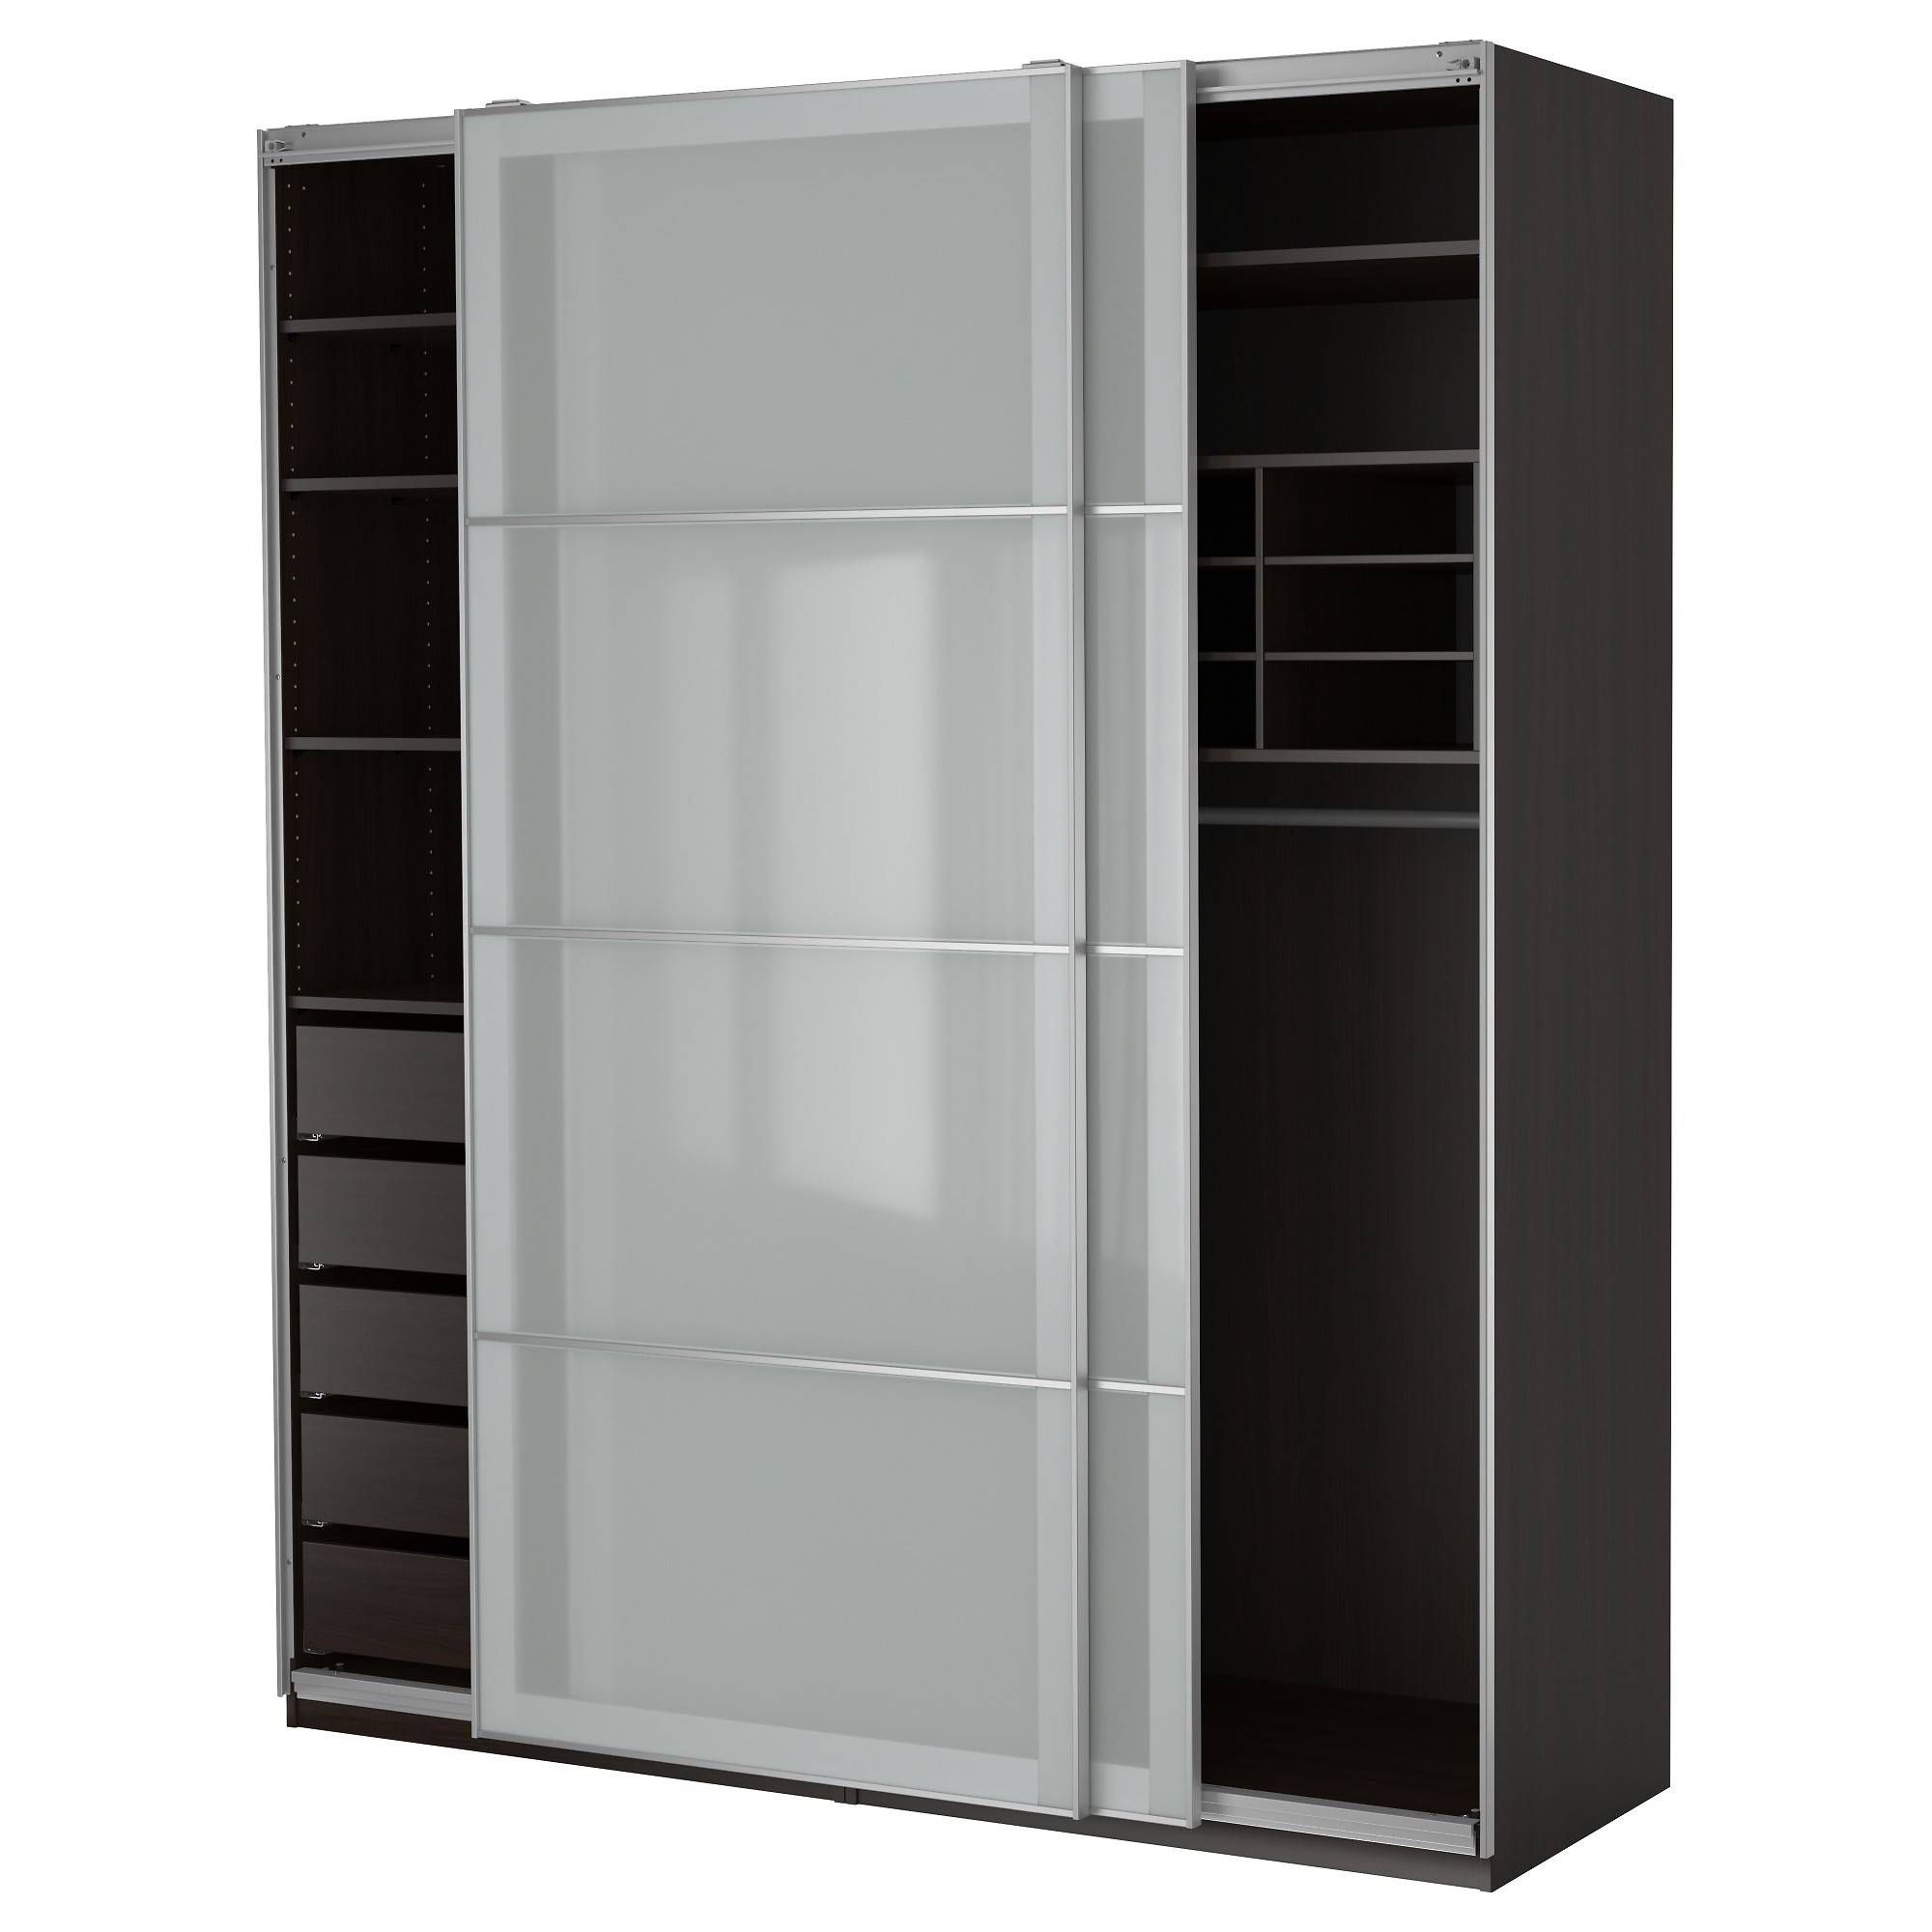 Black Stained Solid Wood Wardrobe Having Open Shelf And Drawers Intended For Wardrobe With Drawers And Shelves (View 14 of 30)